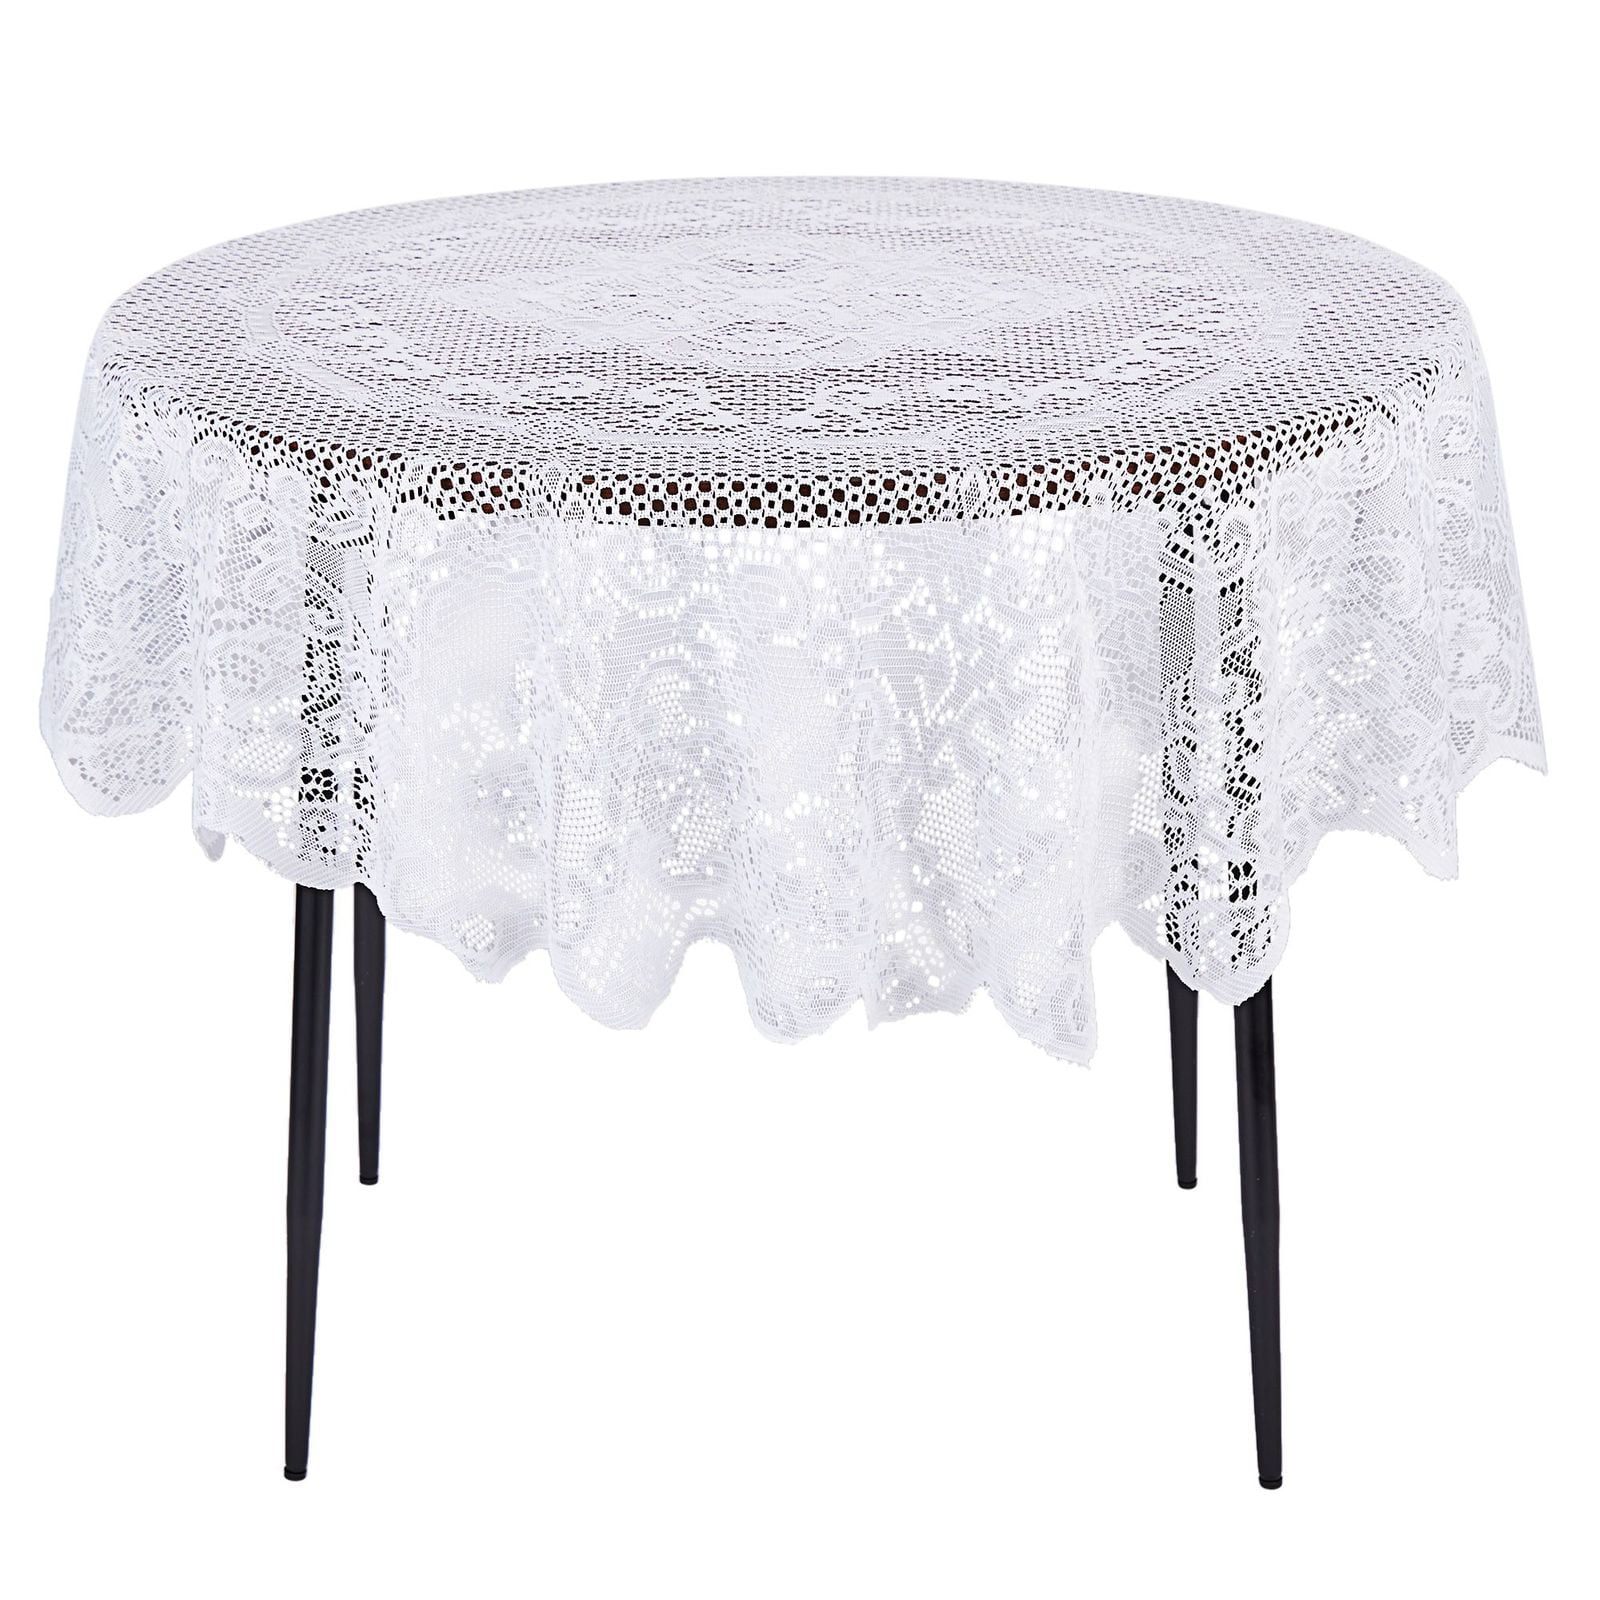 Embroidered Lace Tablecloth Floral Table Runner Doily Wedding Party Satin Decor 